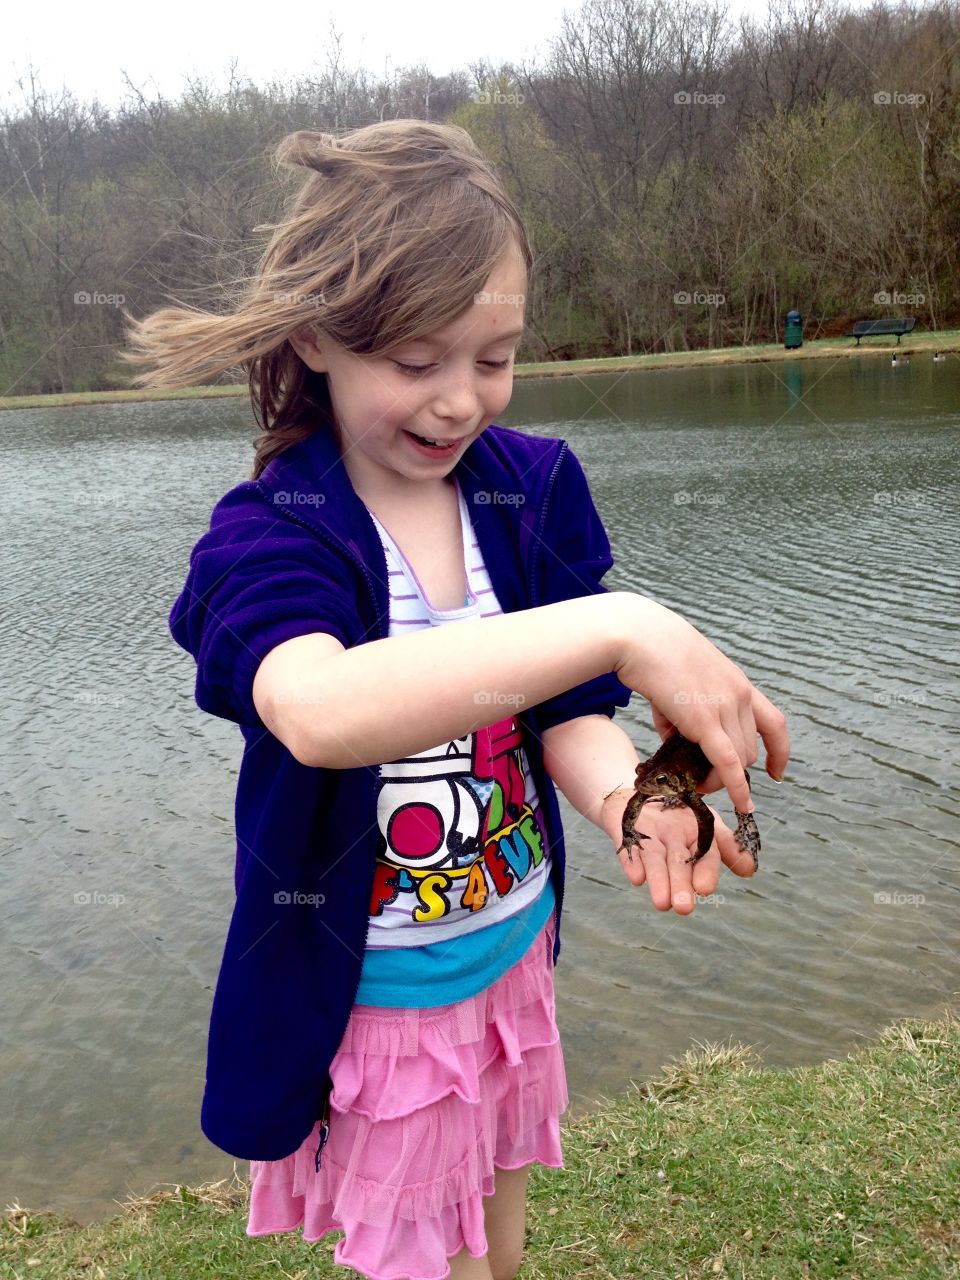 Catching Toads. She was so delighted at the first toad she caught. 